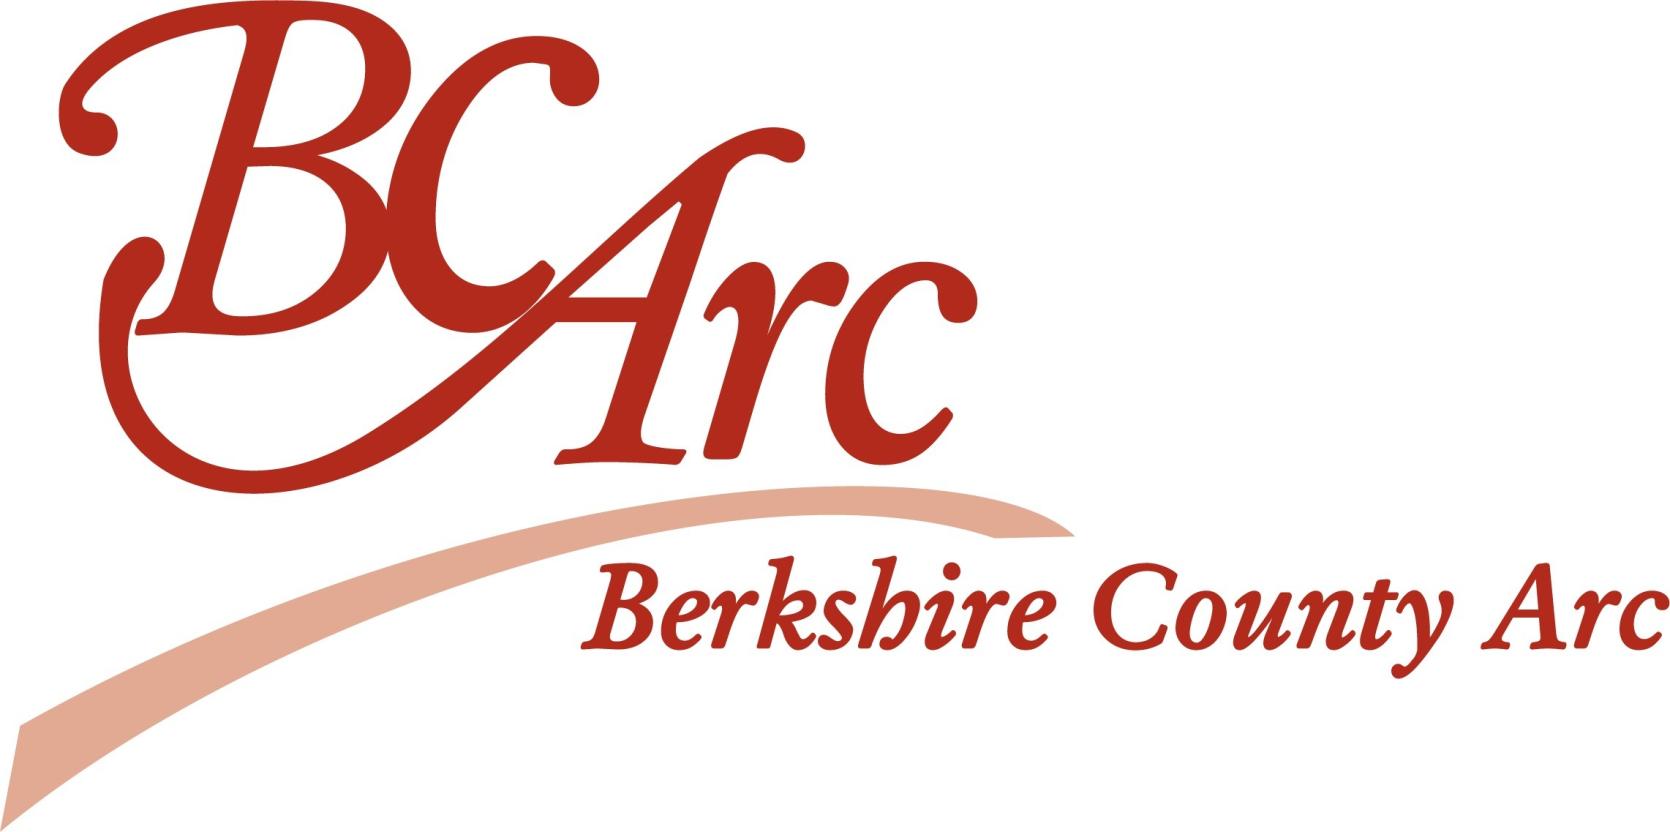 Audit Shows Questionable Use of State Funds at Berkshire County Arc ...